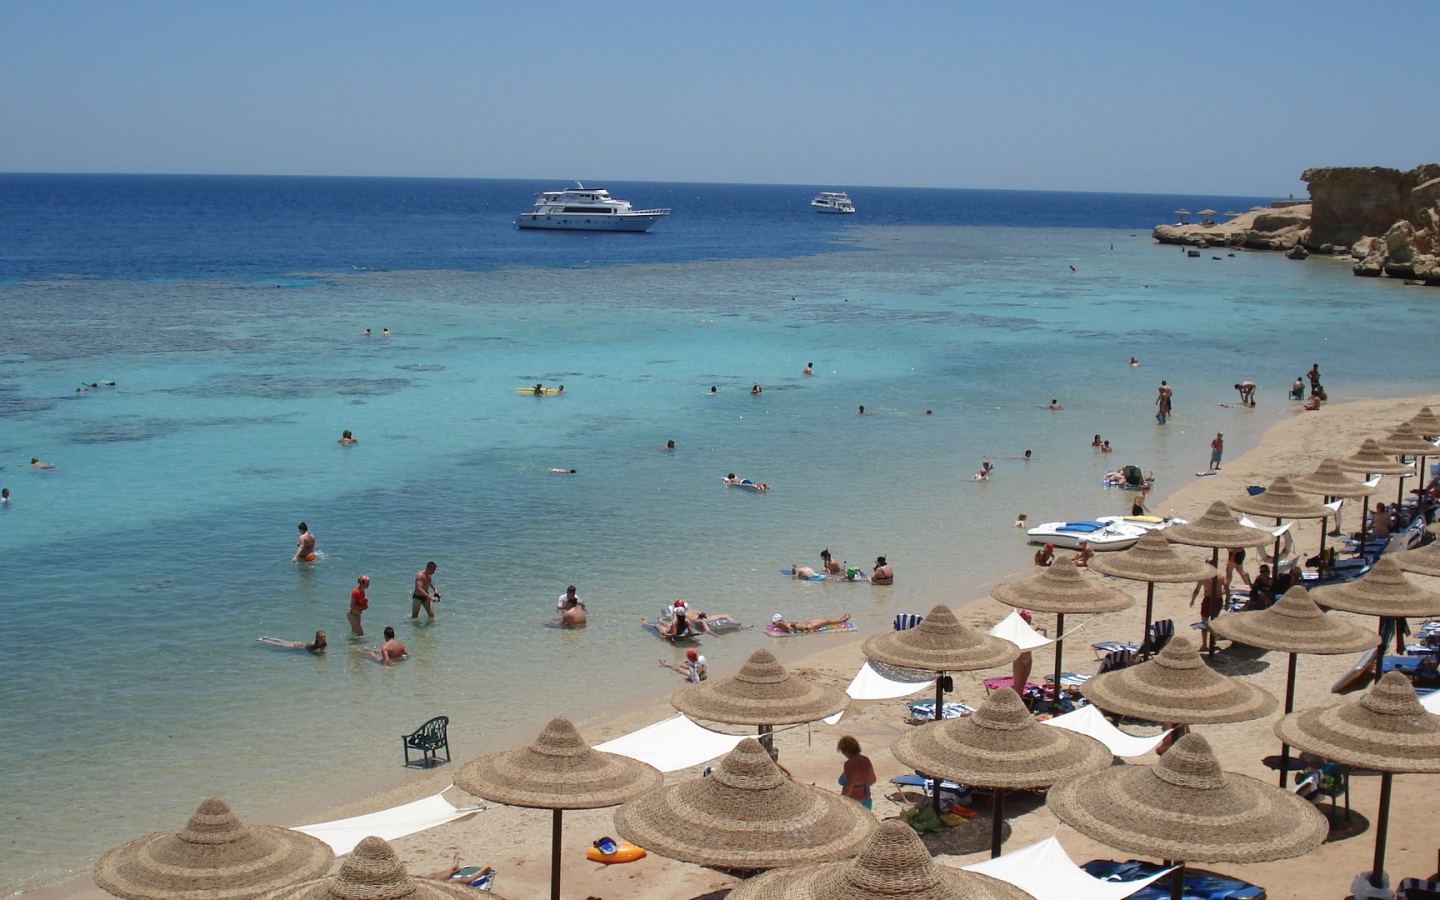 Relax on the beach in the resort of Sharm El Sheikh, Egypt